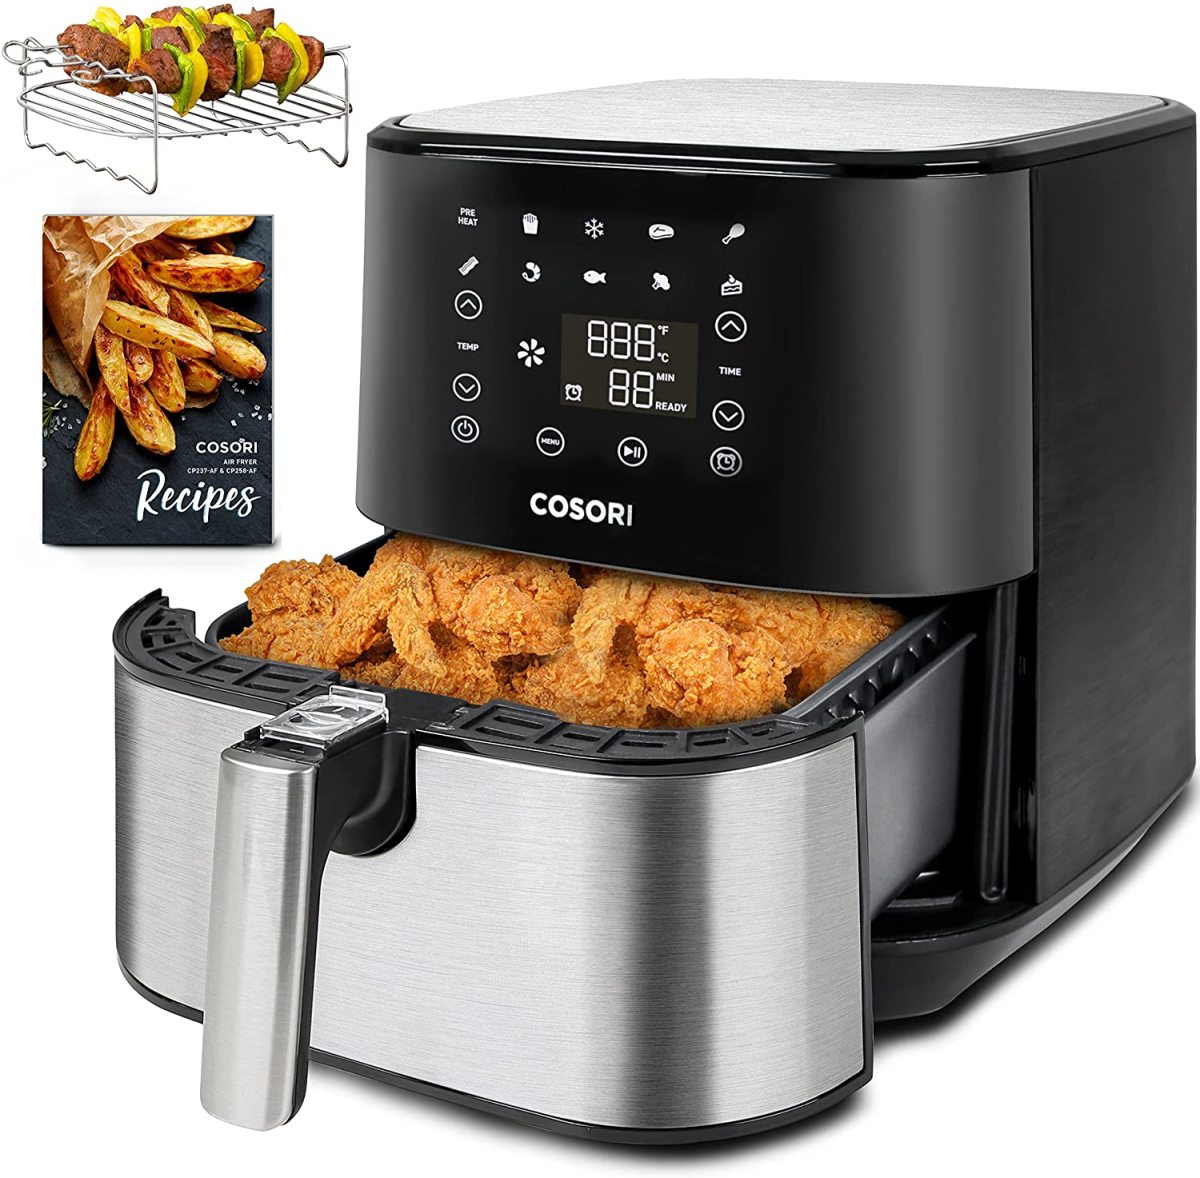 There are many benefits of using an air fryer.